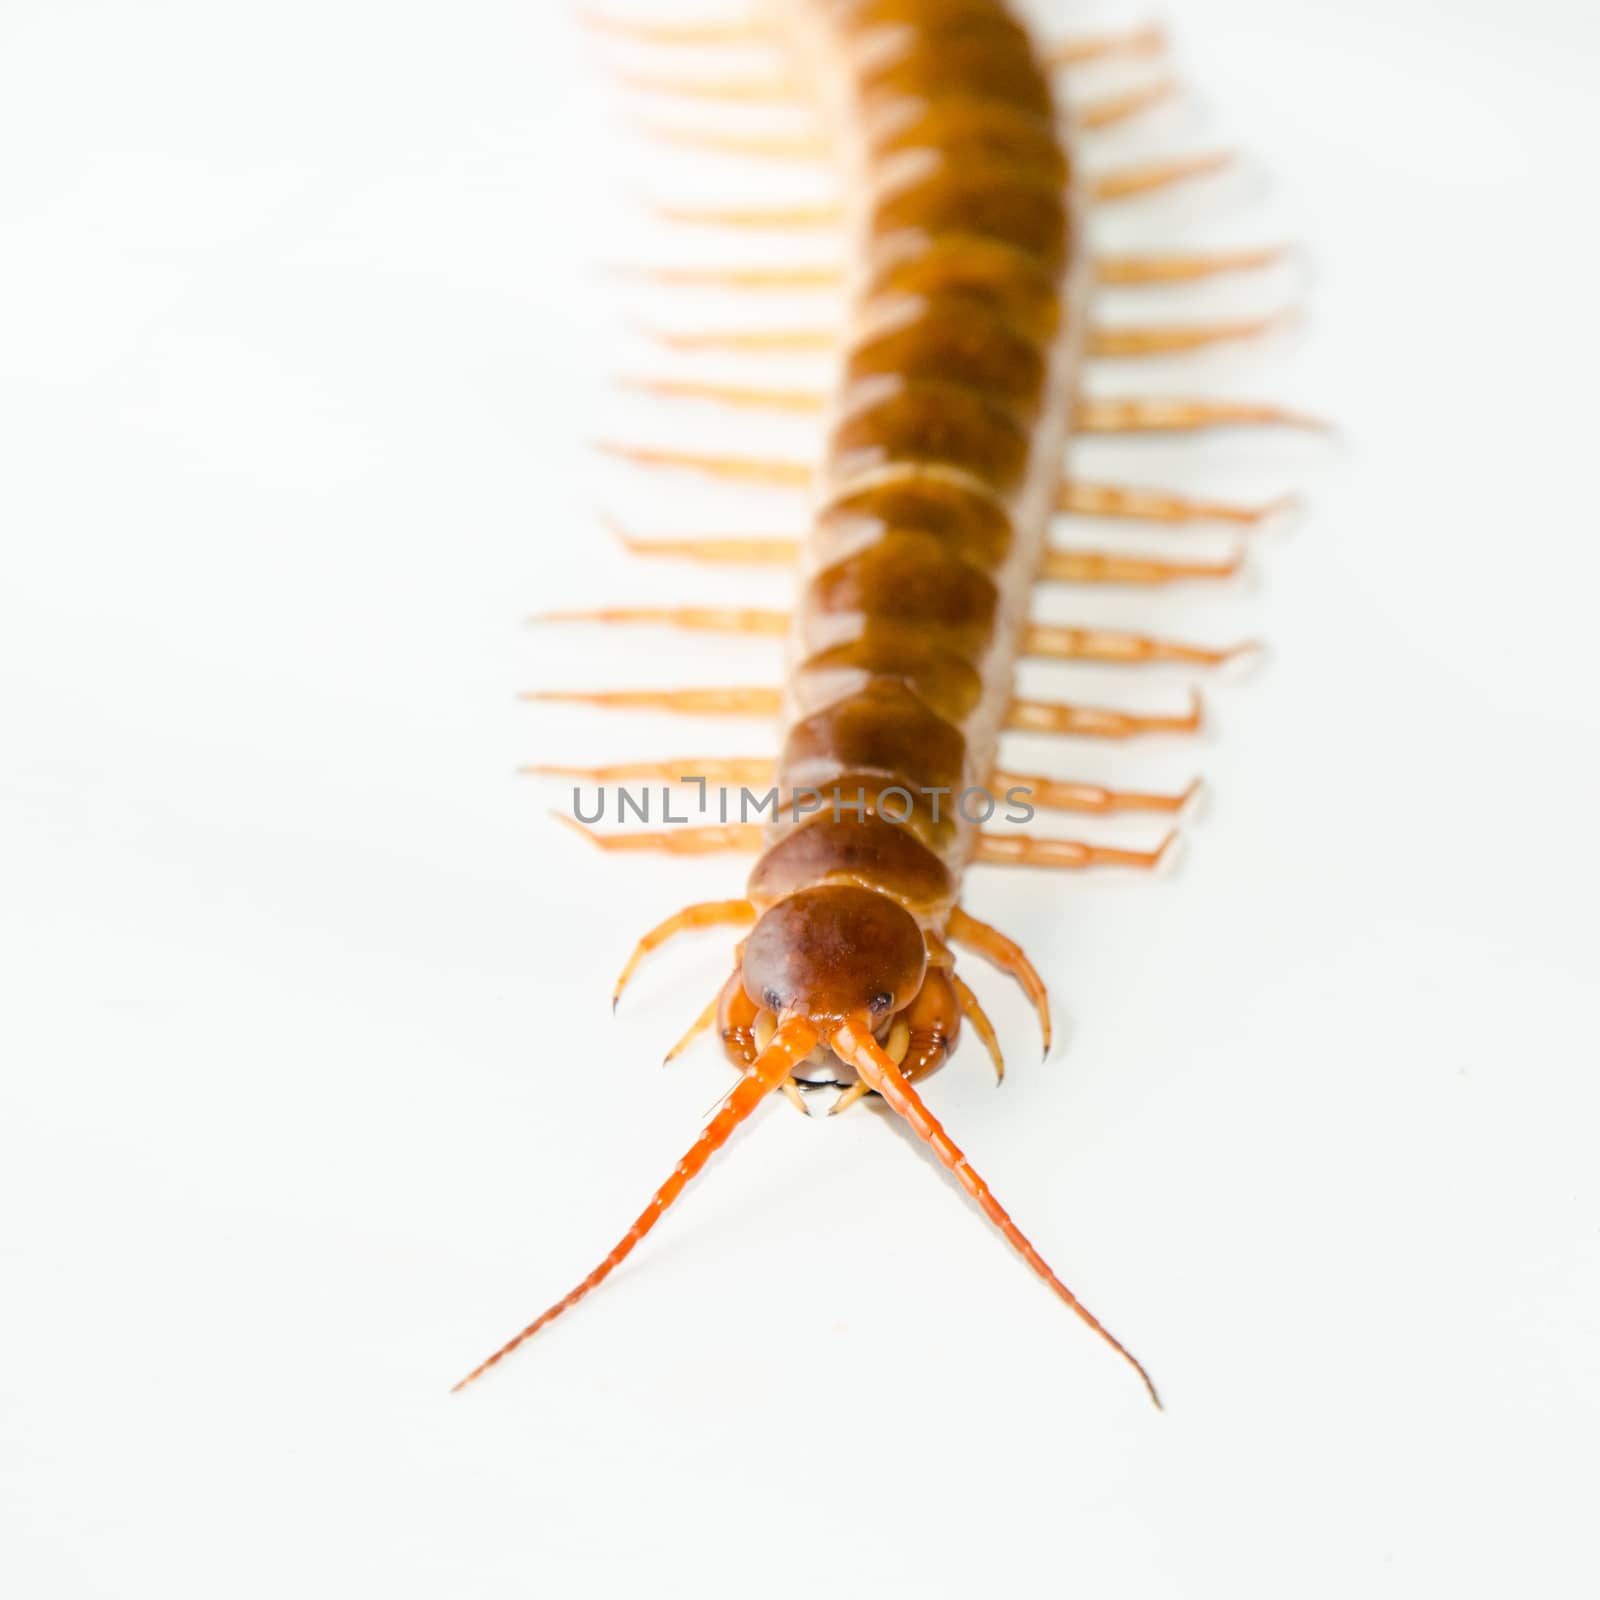 Centipede isolated on white background